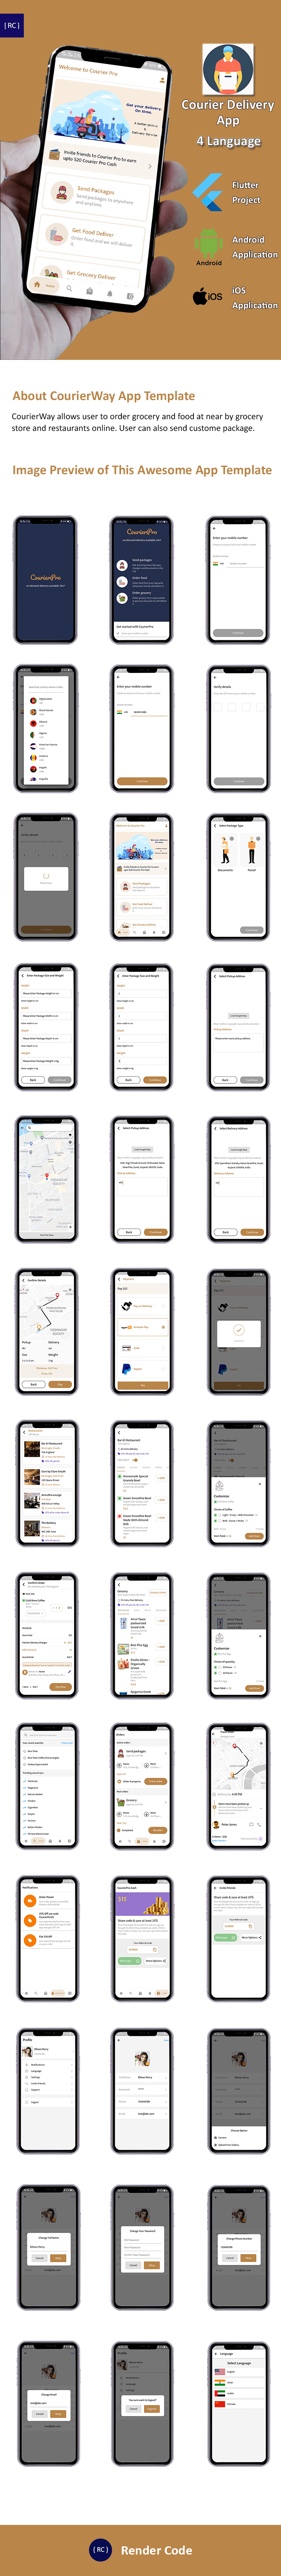 Courier Delivery Flutter Template | 2 Apps | User App & Delivery App | Multi Language | CourierWay - 5